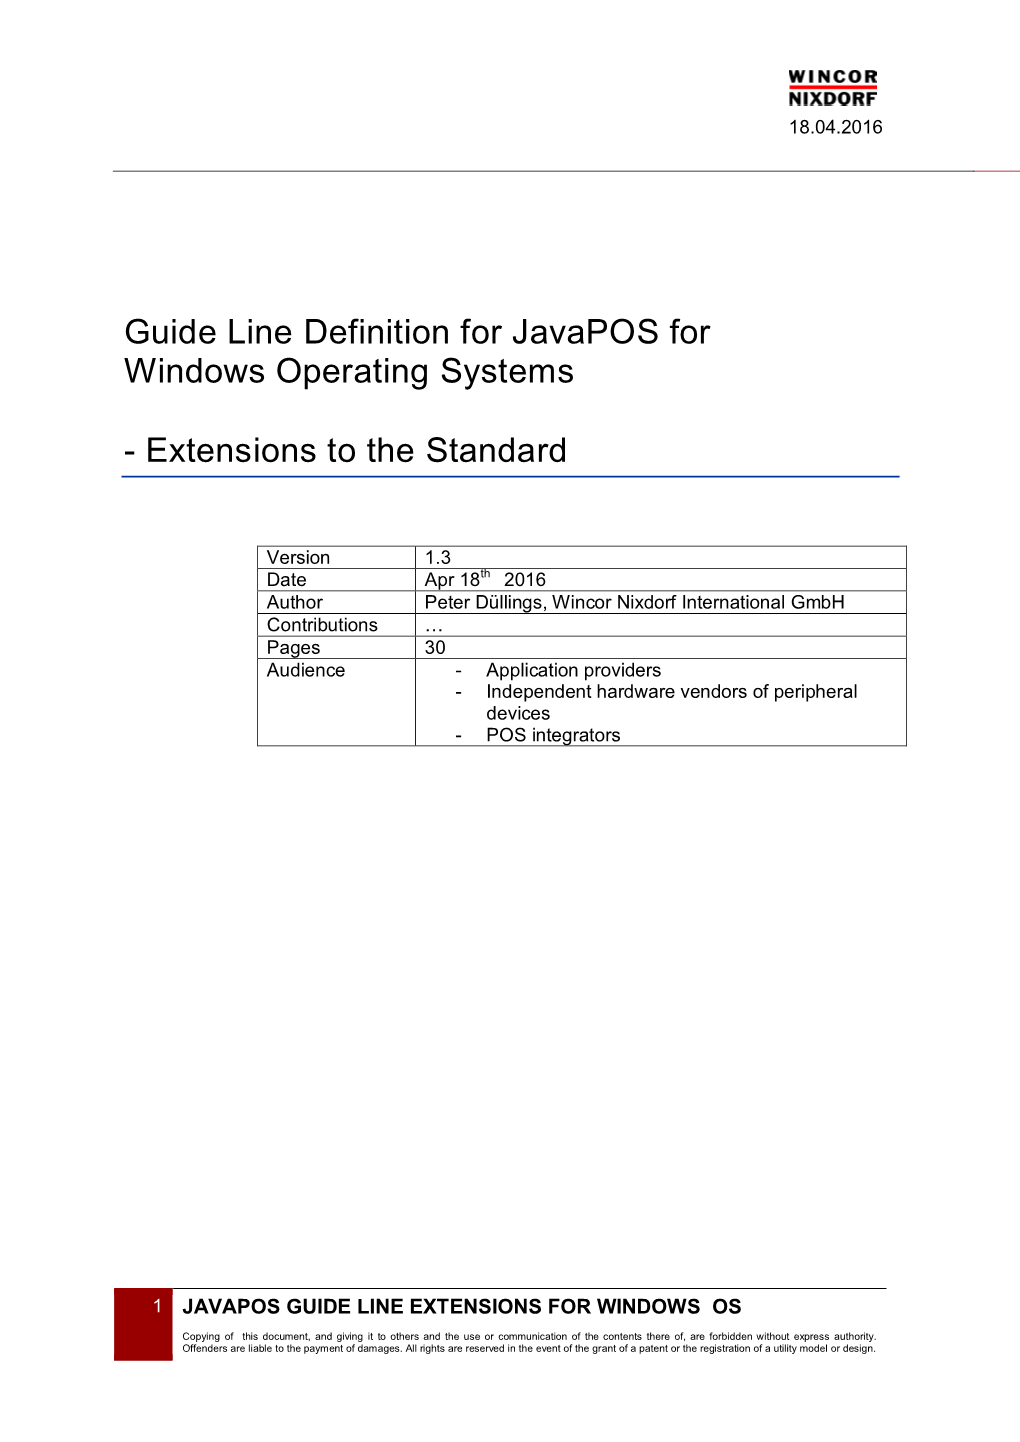 Guide Line Definition for Javapos for Windows Operating Systems